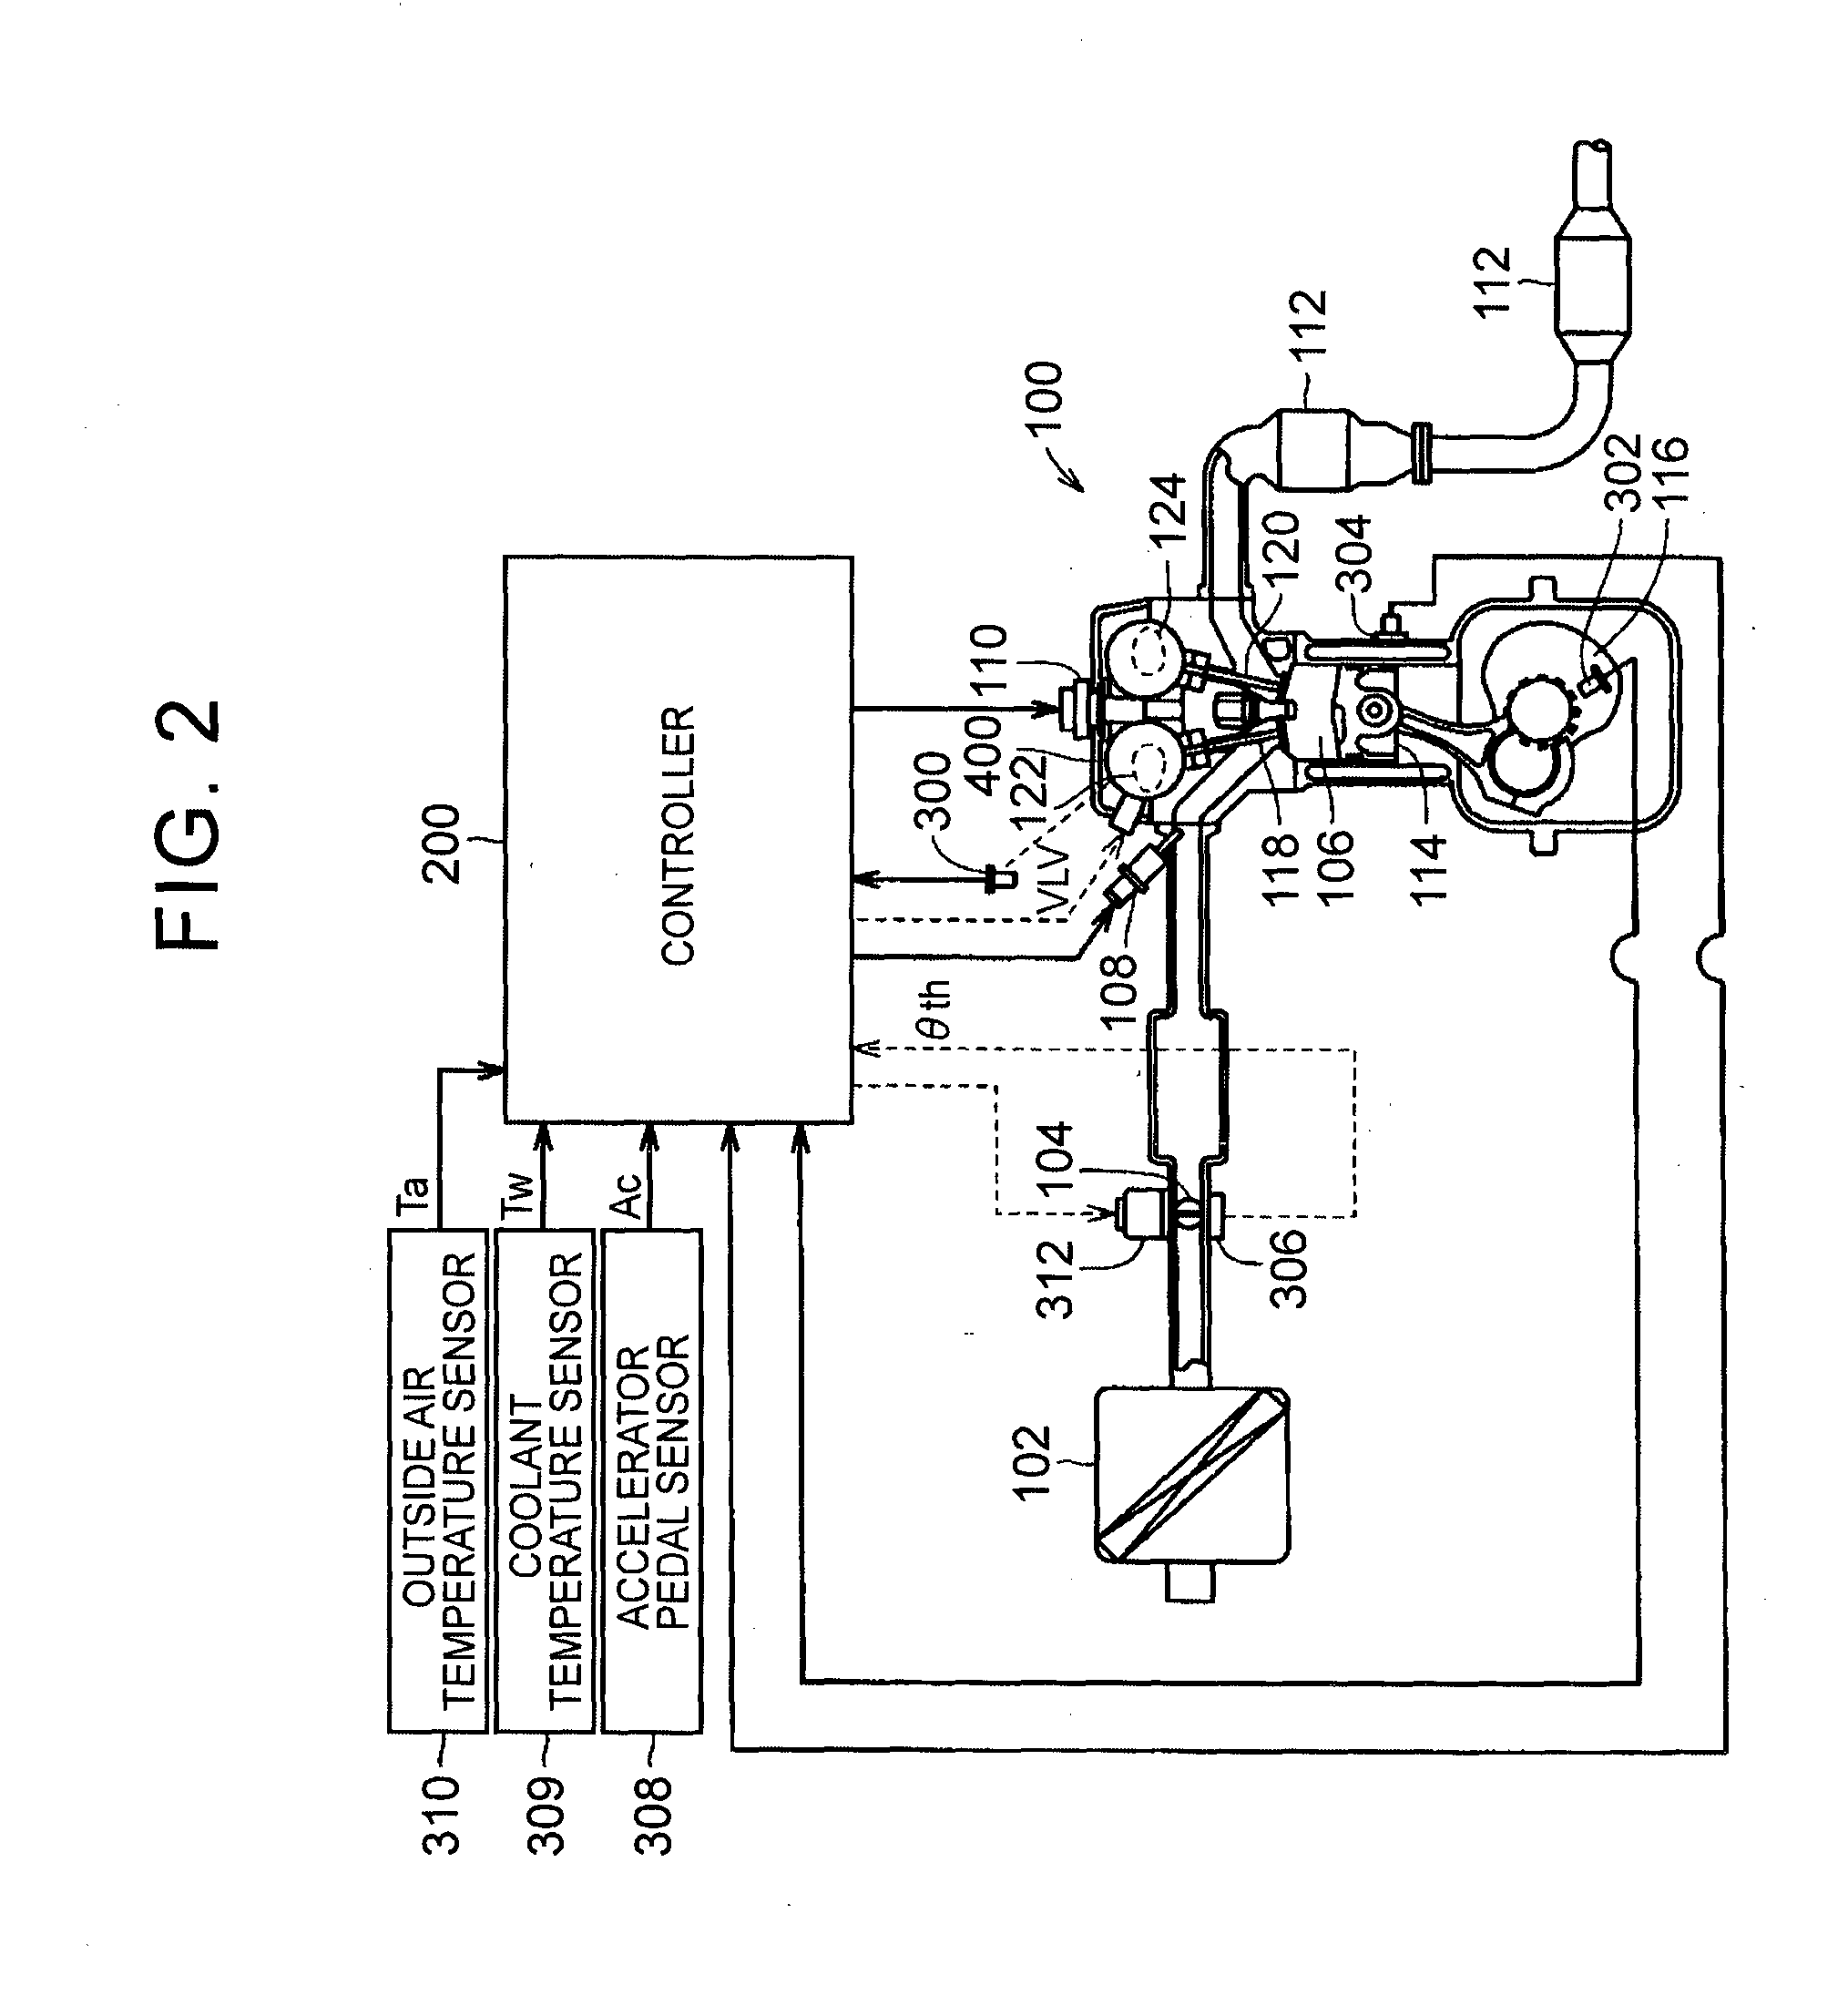 Hybrid vehicle, controller for hybrid vehicle, and control method for hybrid vehicle for reducing the compression ratio at start-up of the engine according a battery level